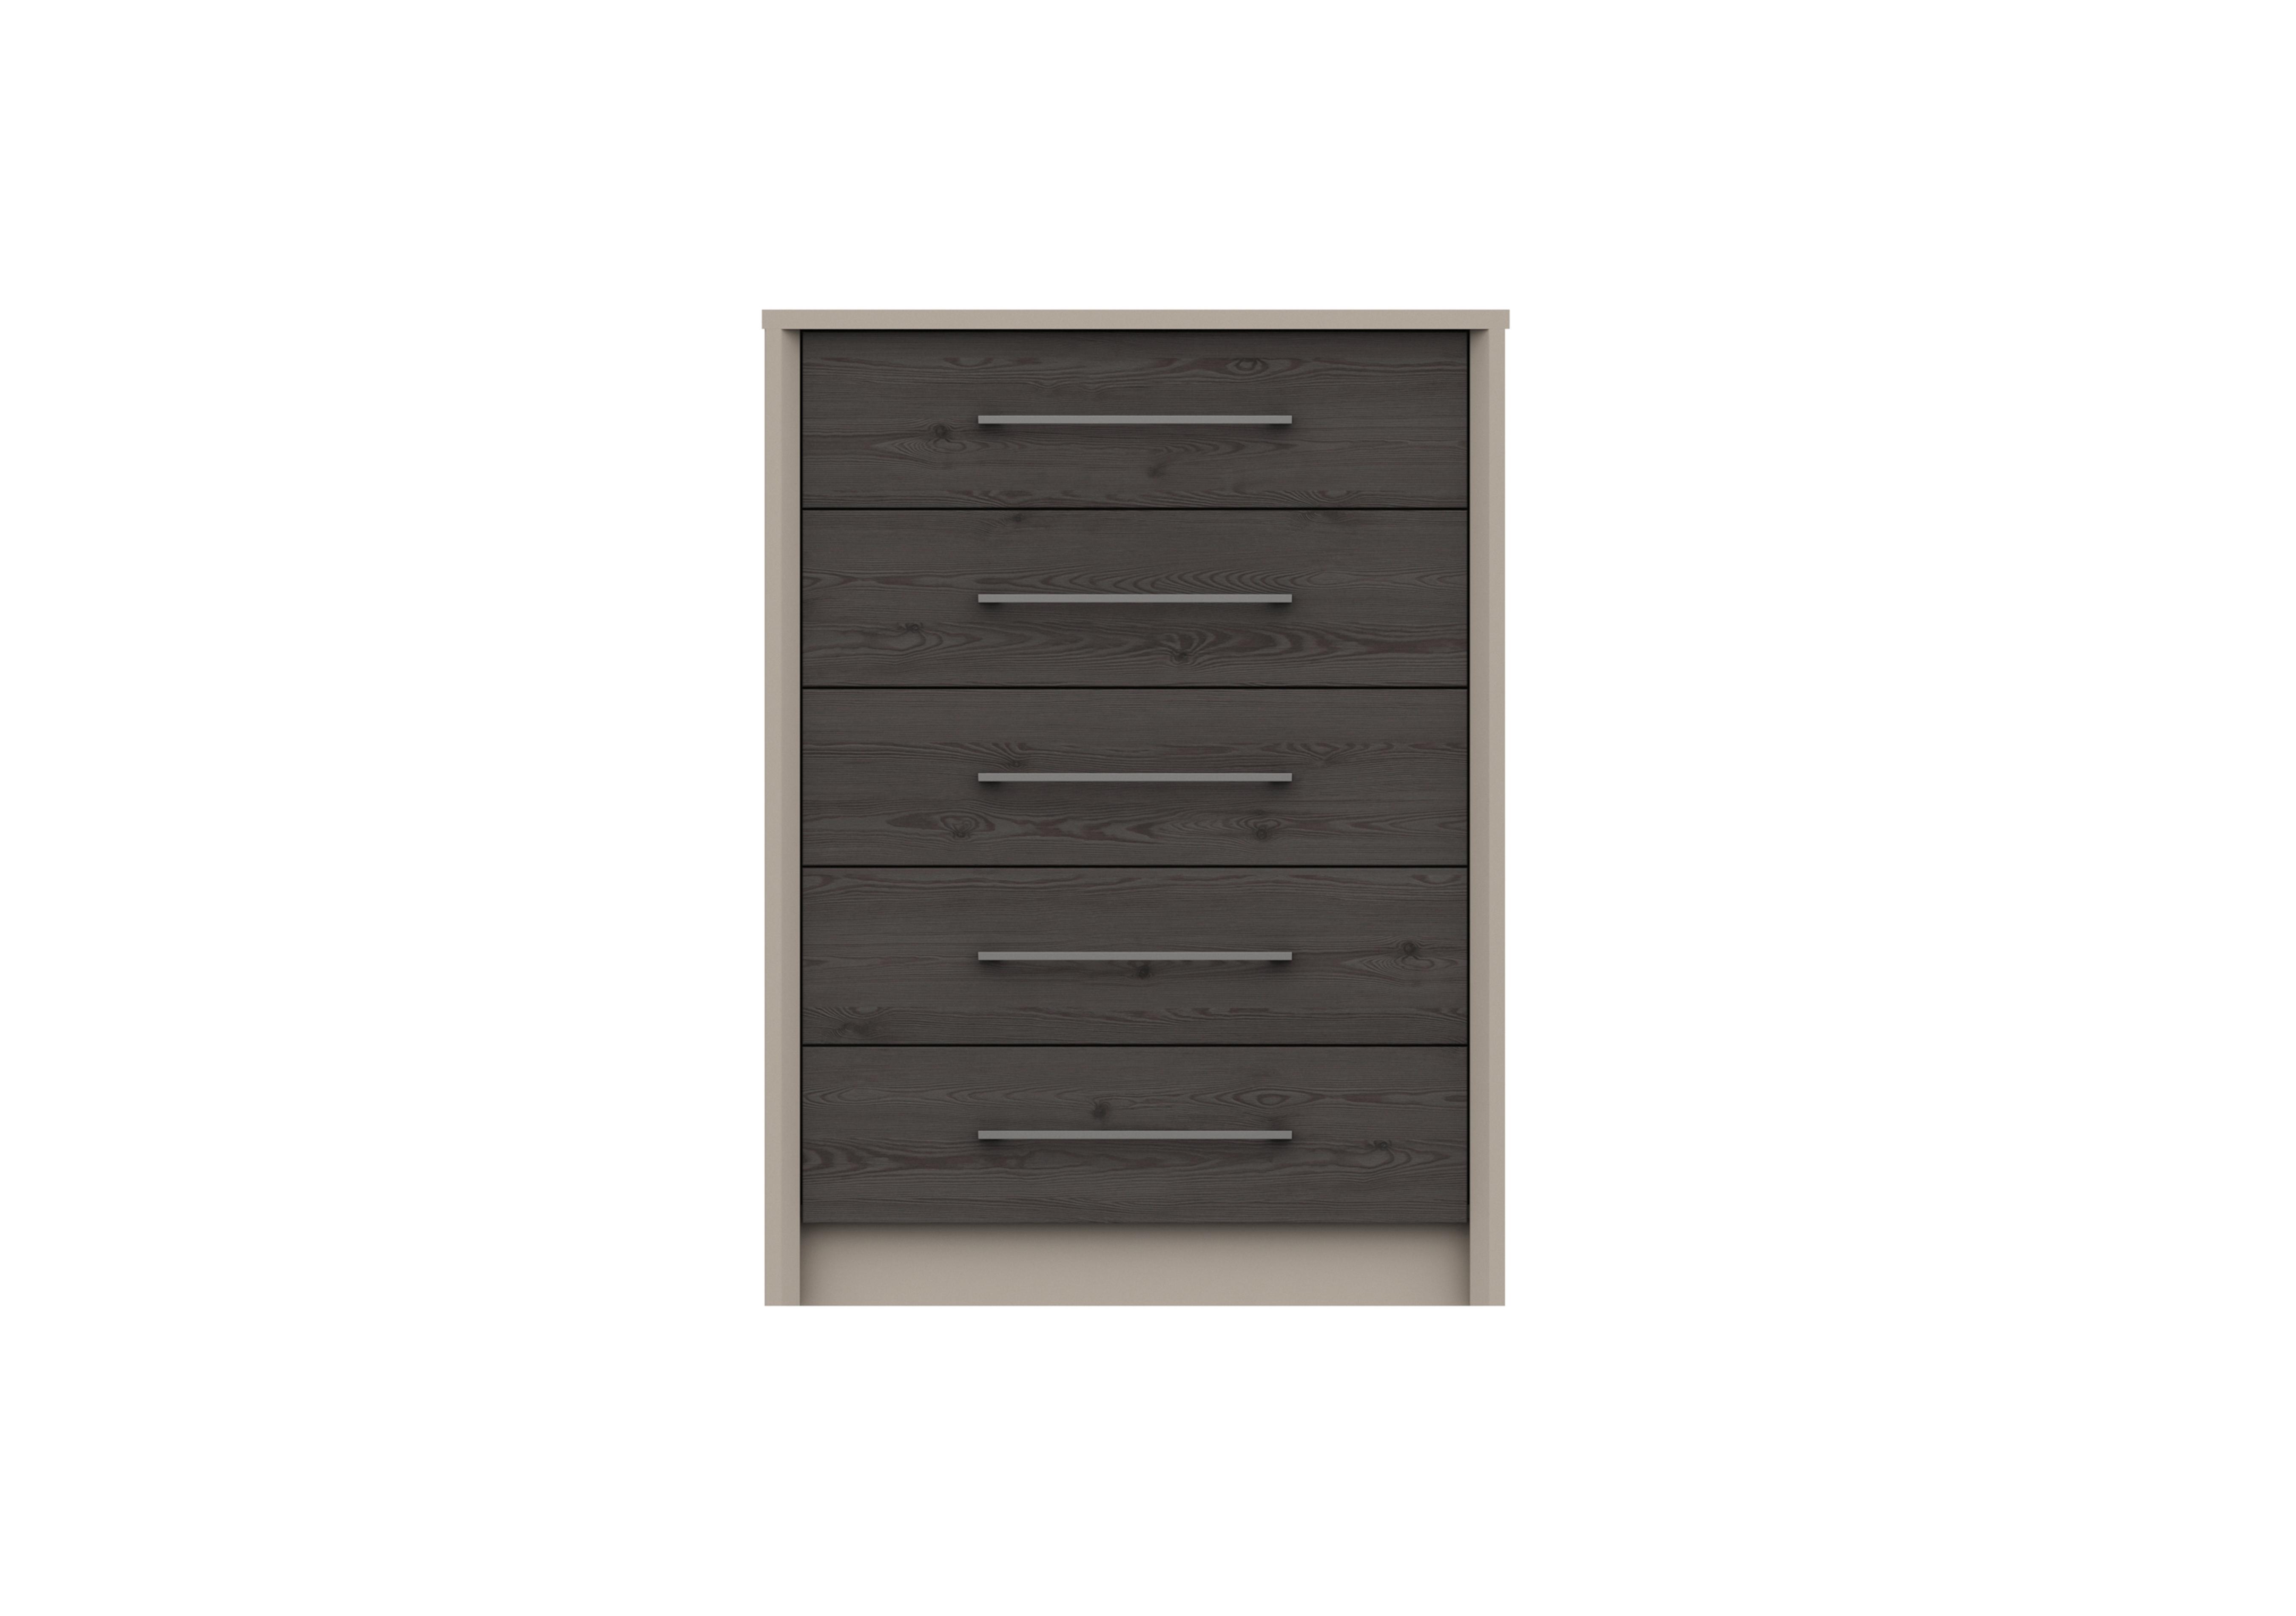 Paddington 5 Drawer Chest in Fired Earth/Anthracite Larch on Furniture Village